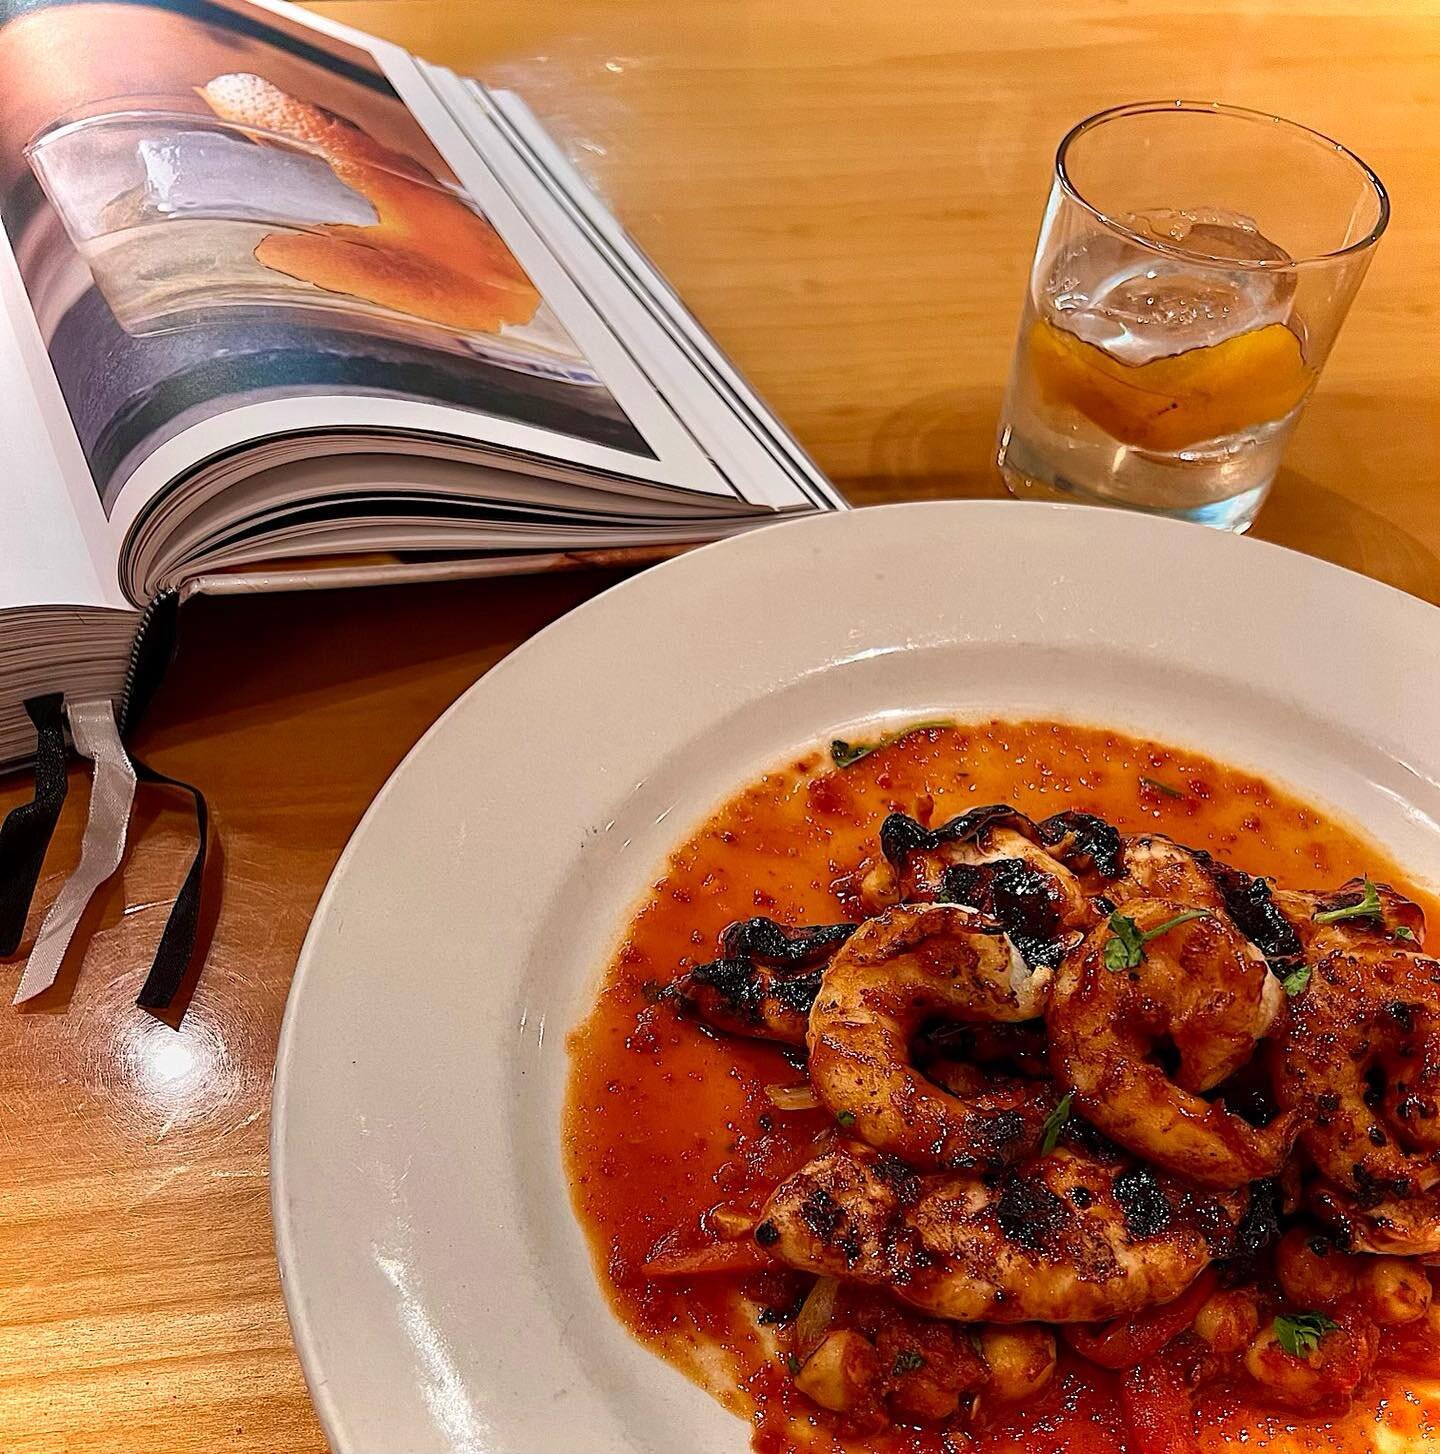 Grilled chicken and shrimp in a Melinda BBQ sauce, served over chickpea medley in a smoky morita salsa with black beans &amp; white rice. 
Pairs well with a Oaxacan Old Fashion!

#merrimackvalley #lawrencema #oaxaca